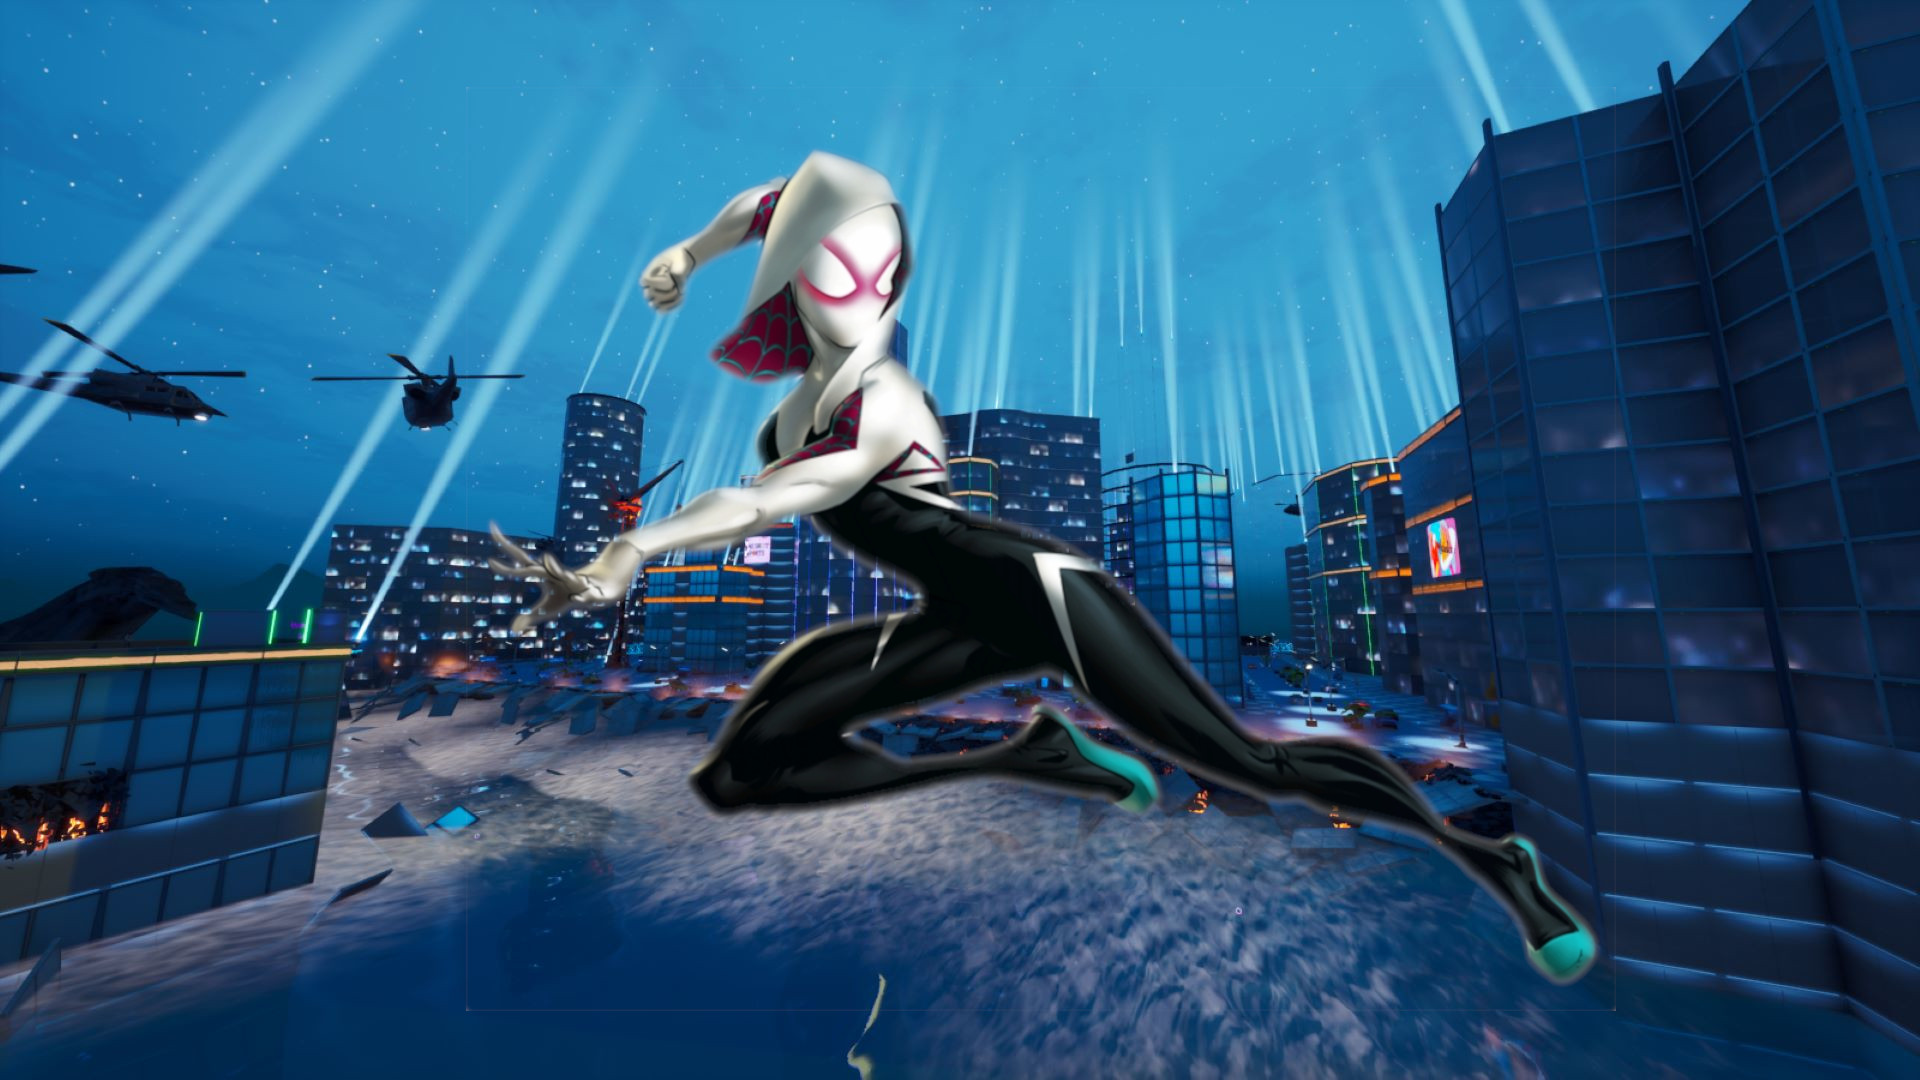 Fortnite Spider-Gwen skin from Into the Spider-Verse set for season 4